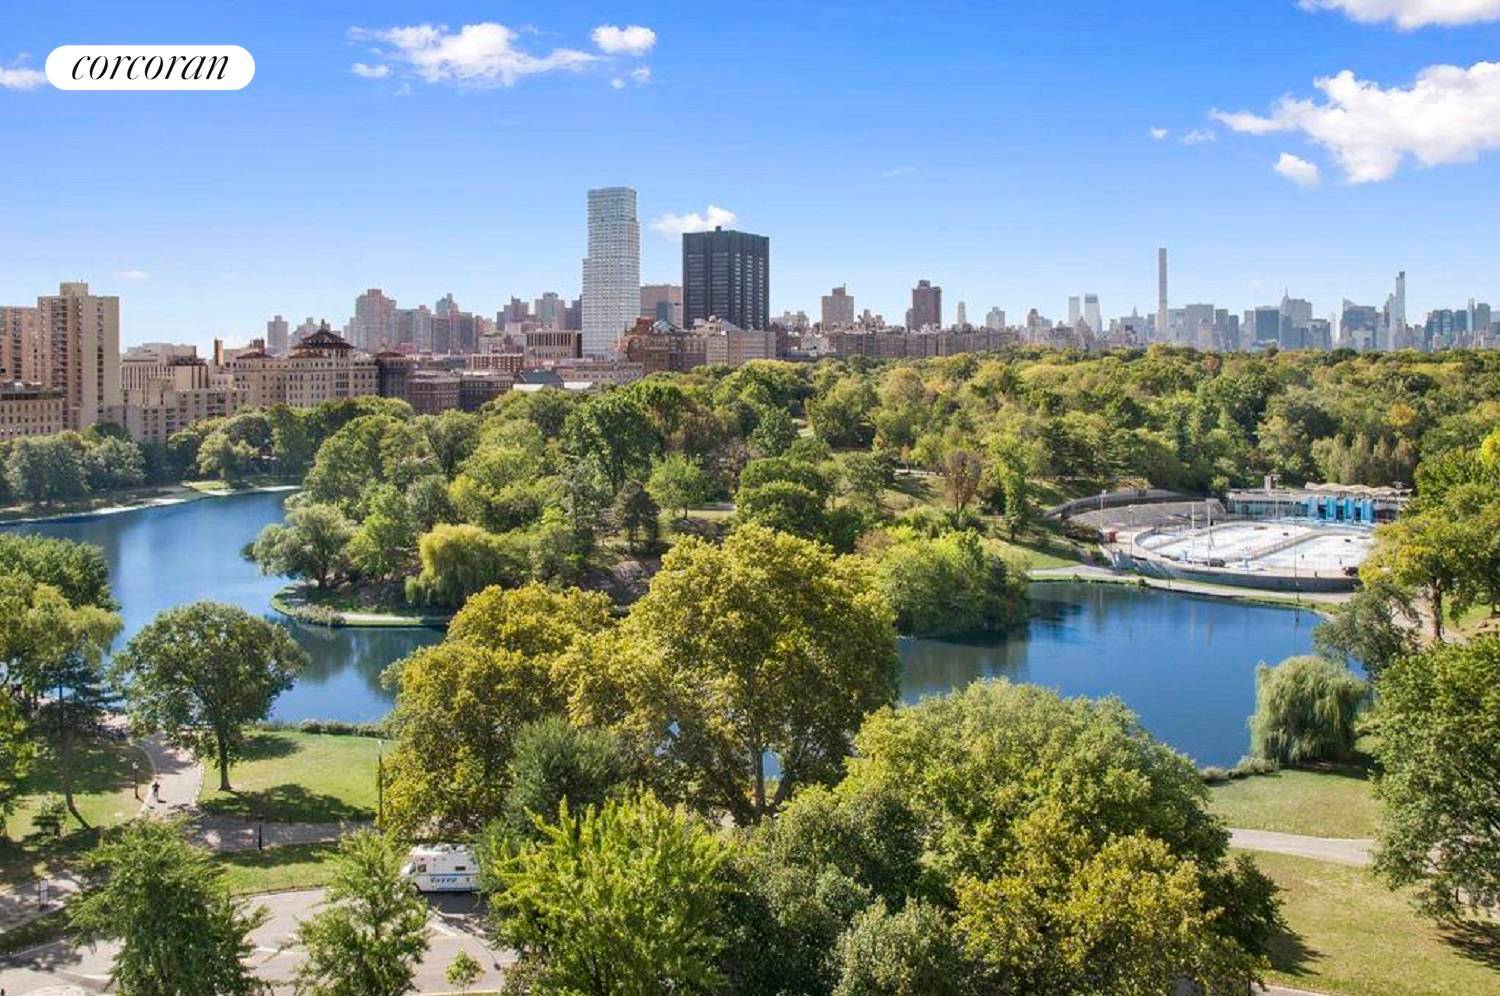 Step into a world of warmth and light in this exquisite 3 bedroom, 3 bathroom home, offering breathtaking views of Central Park.